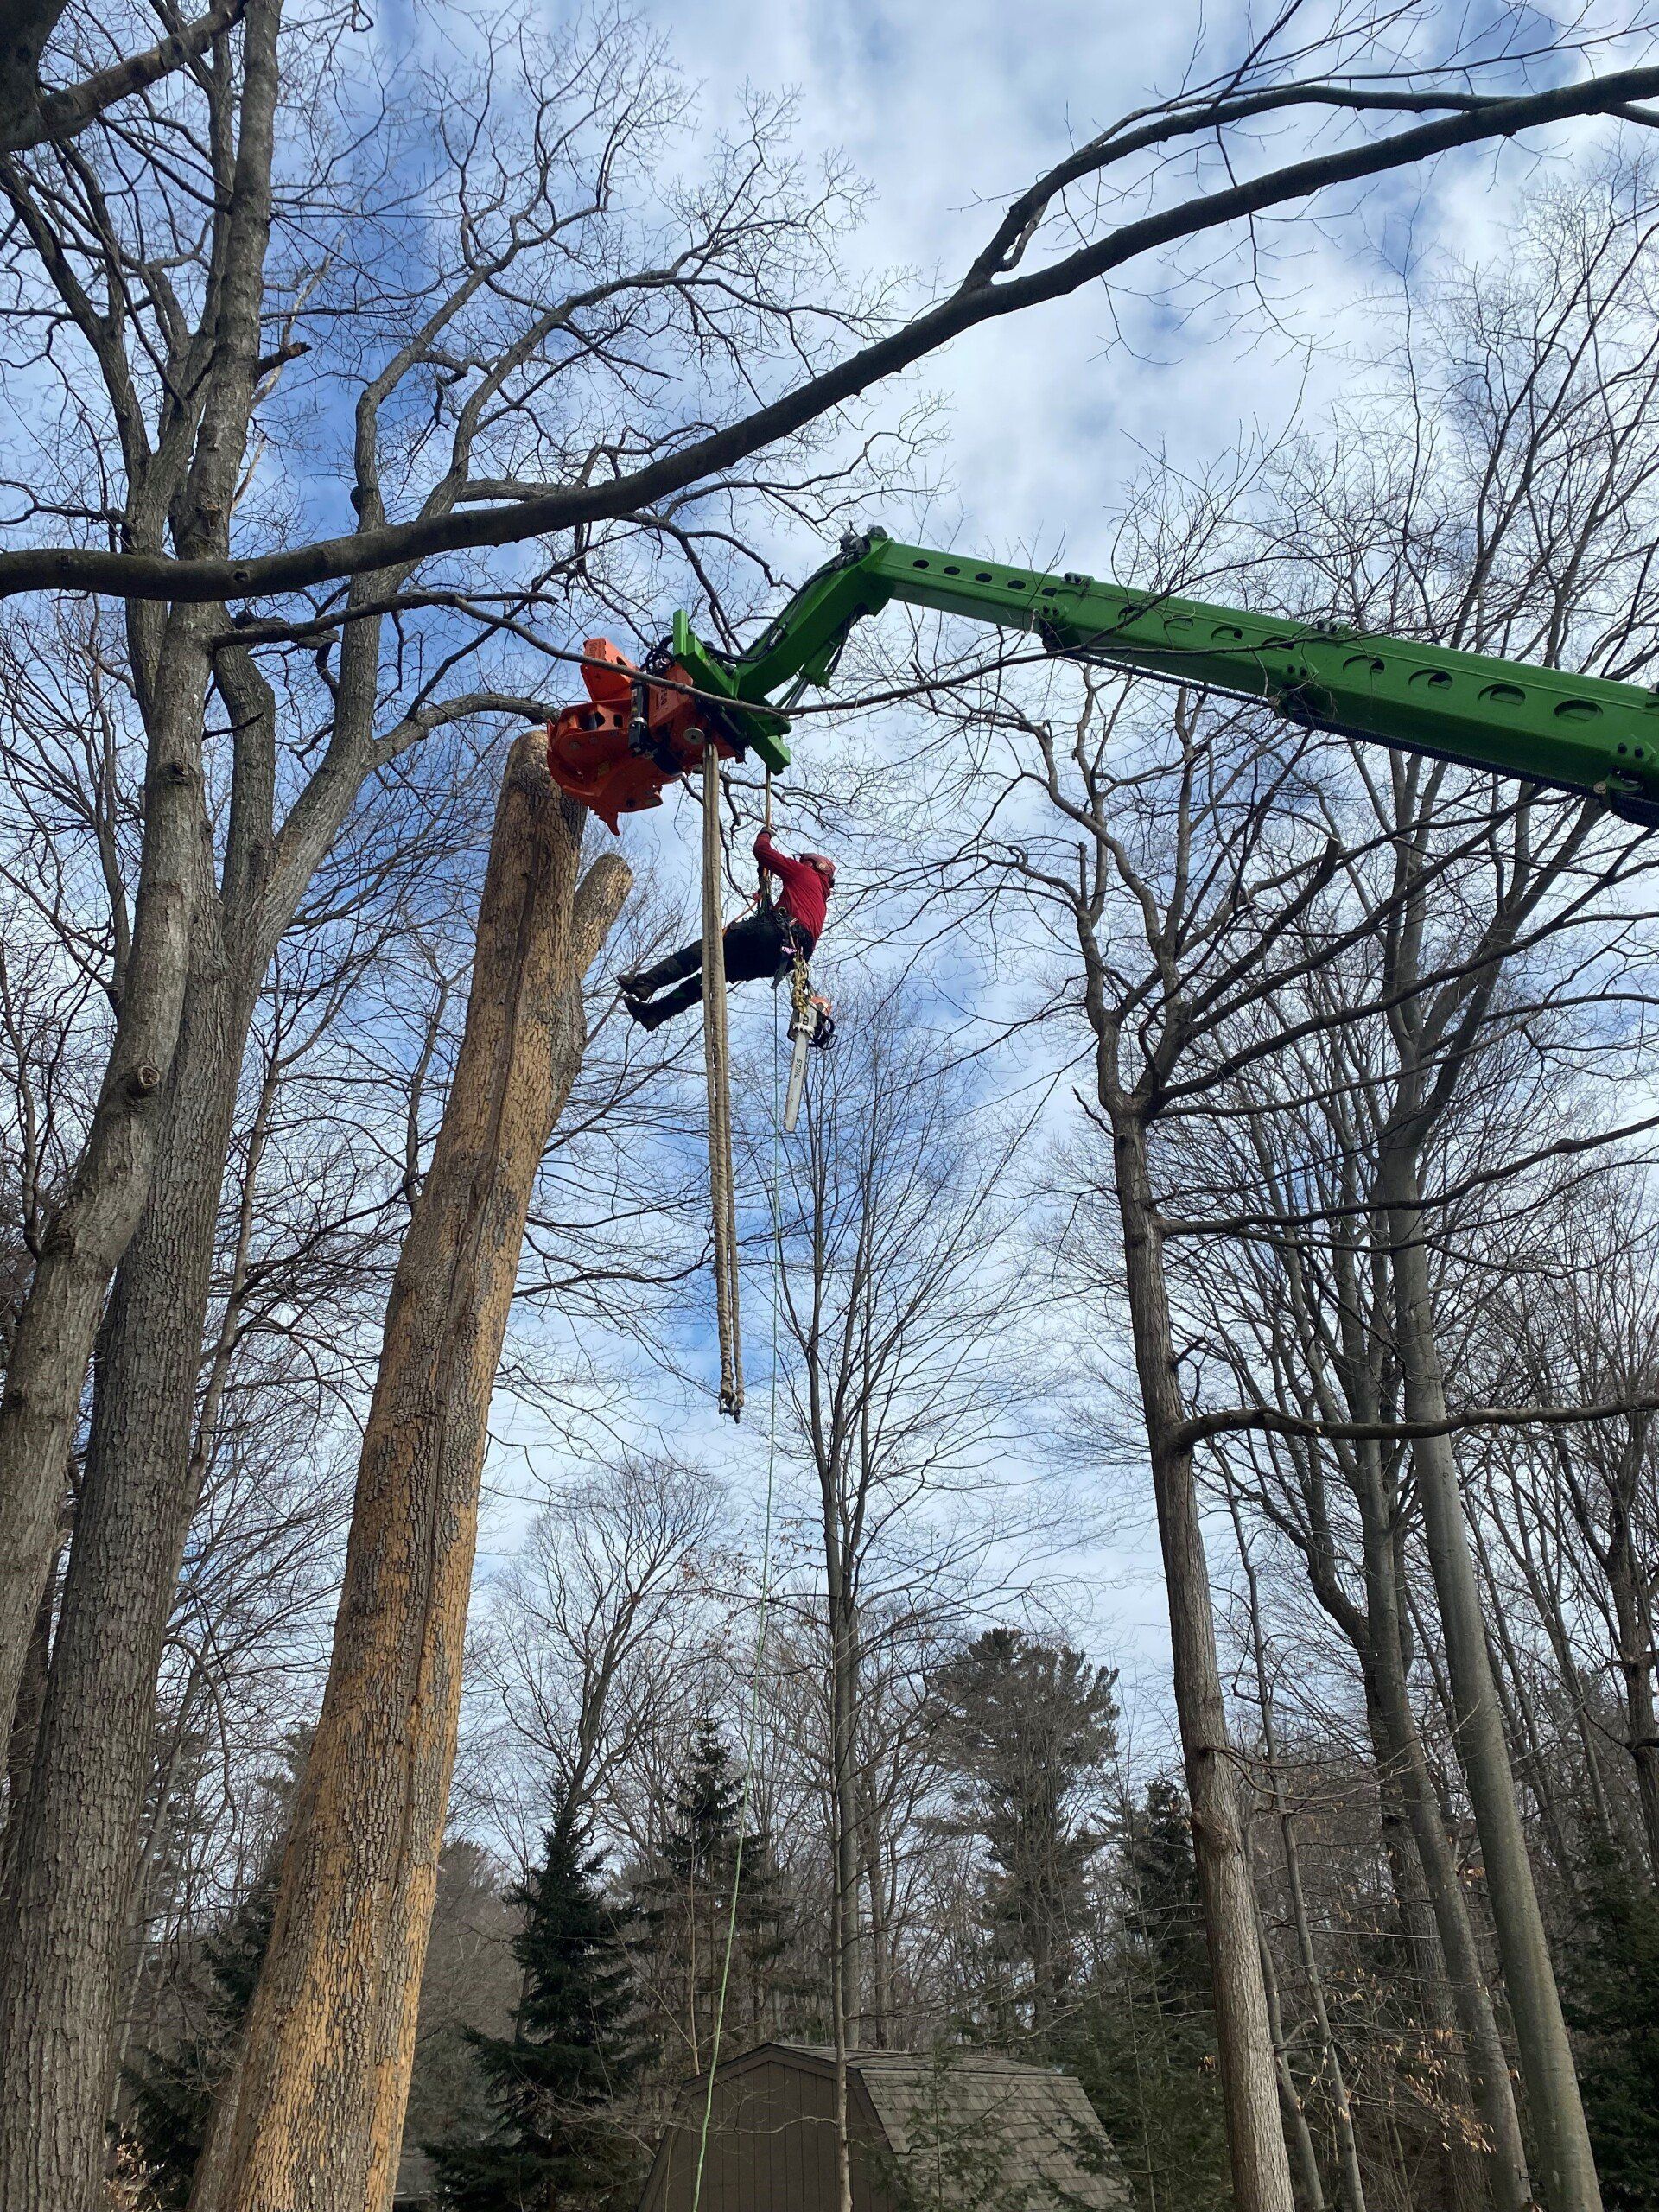 tree removal with a grapple saw truck